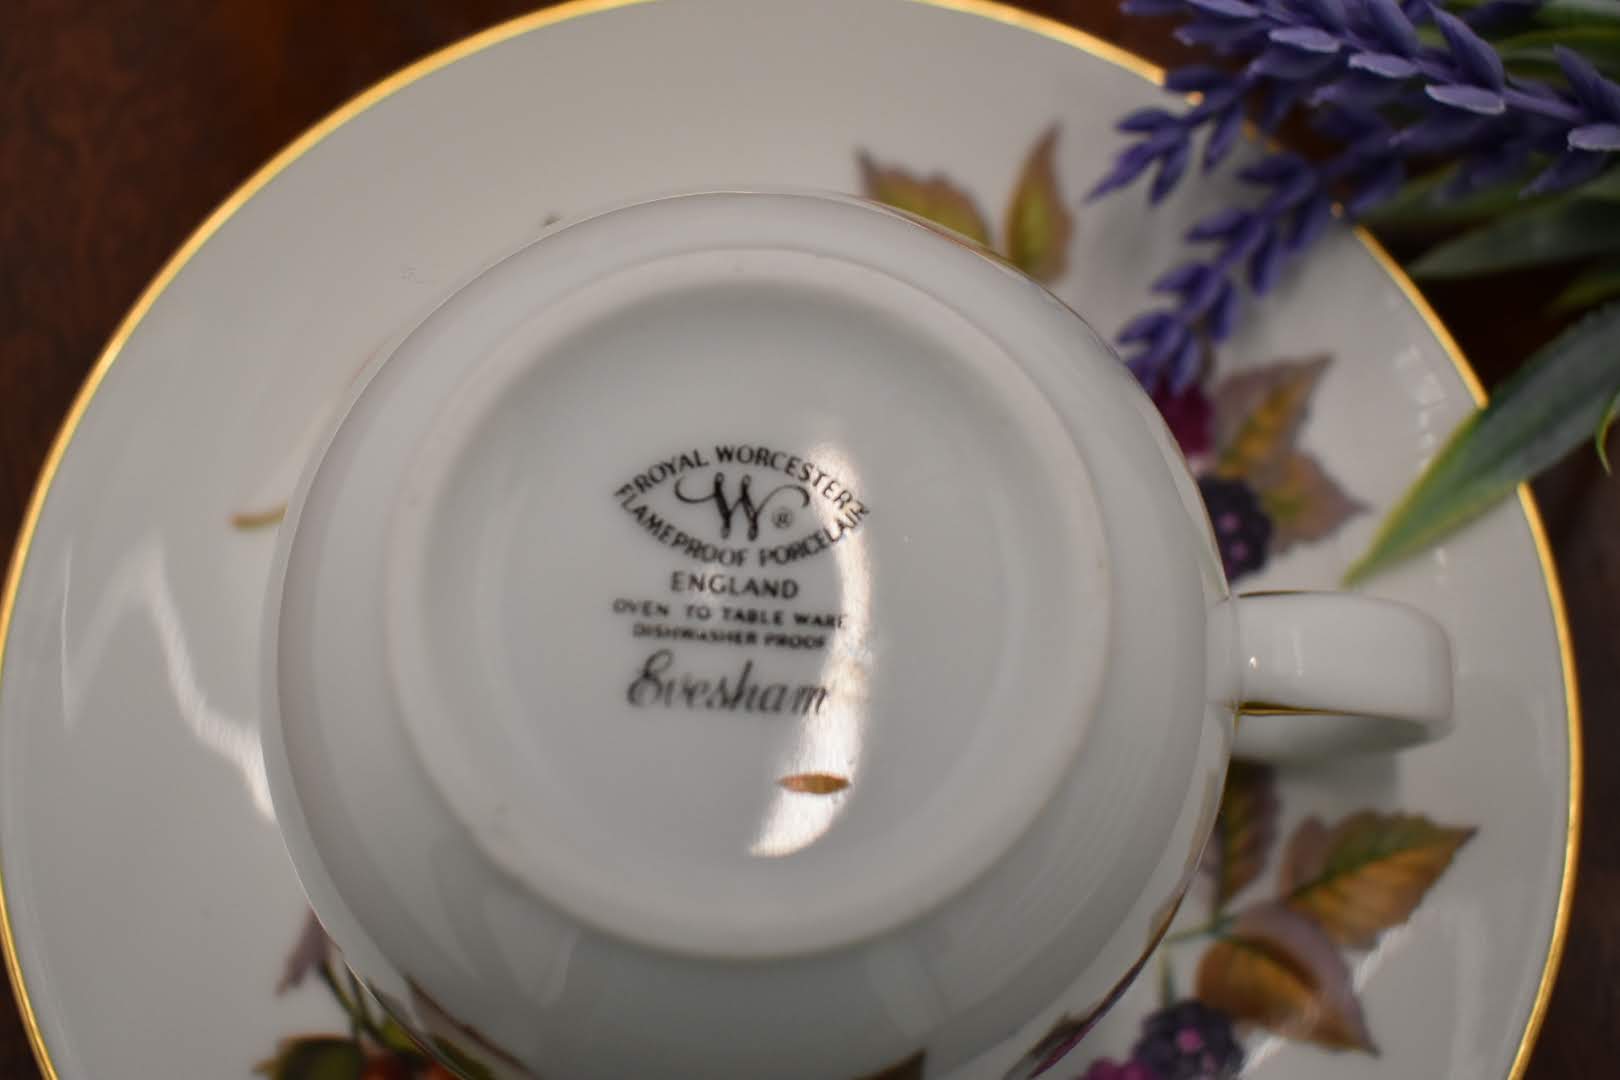 Royal Worchester Evesham - Fine Porcelain China - Cup and Saucer - Gold Trim - From England